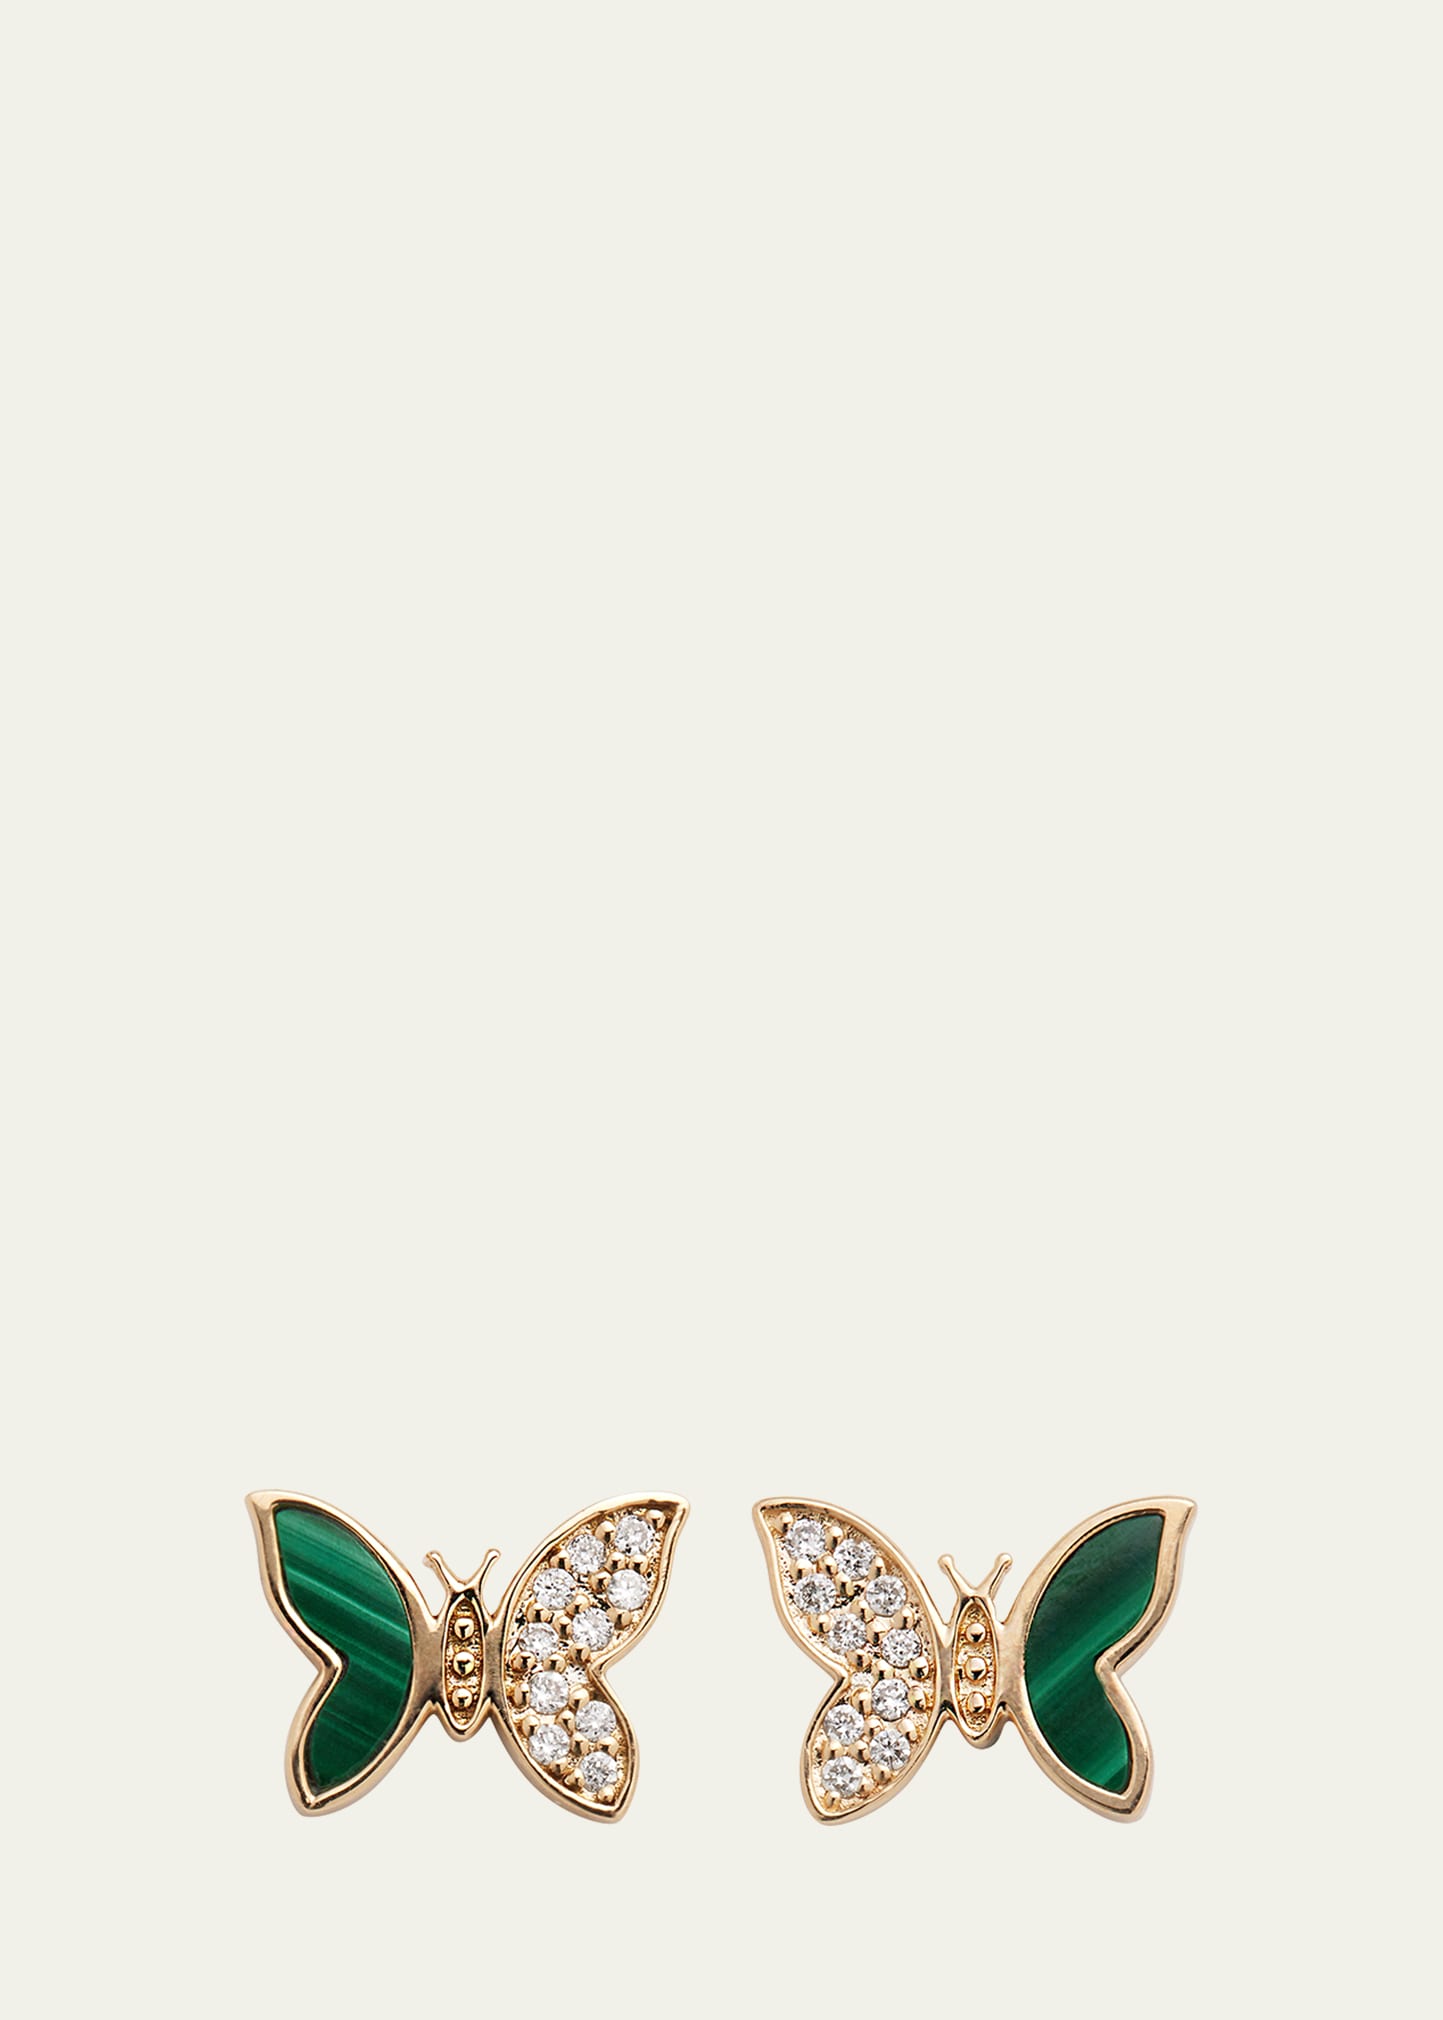 SYDNEY EVAN 14K GOLD TINY BUTTERFLY PAVE EARRINGS WITH DIAMONDS